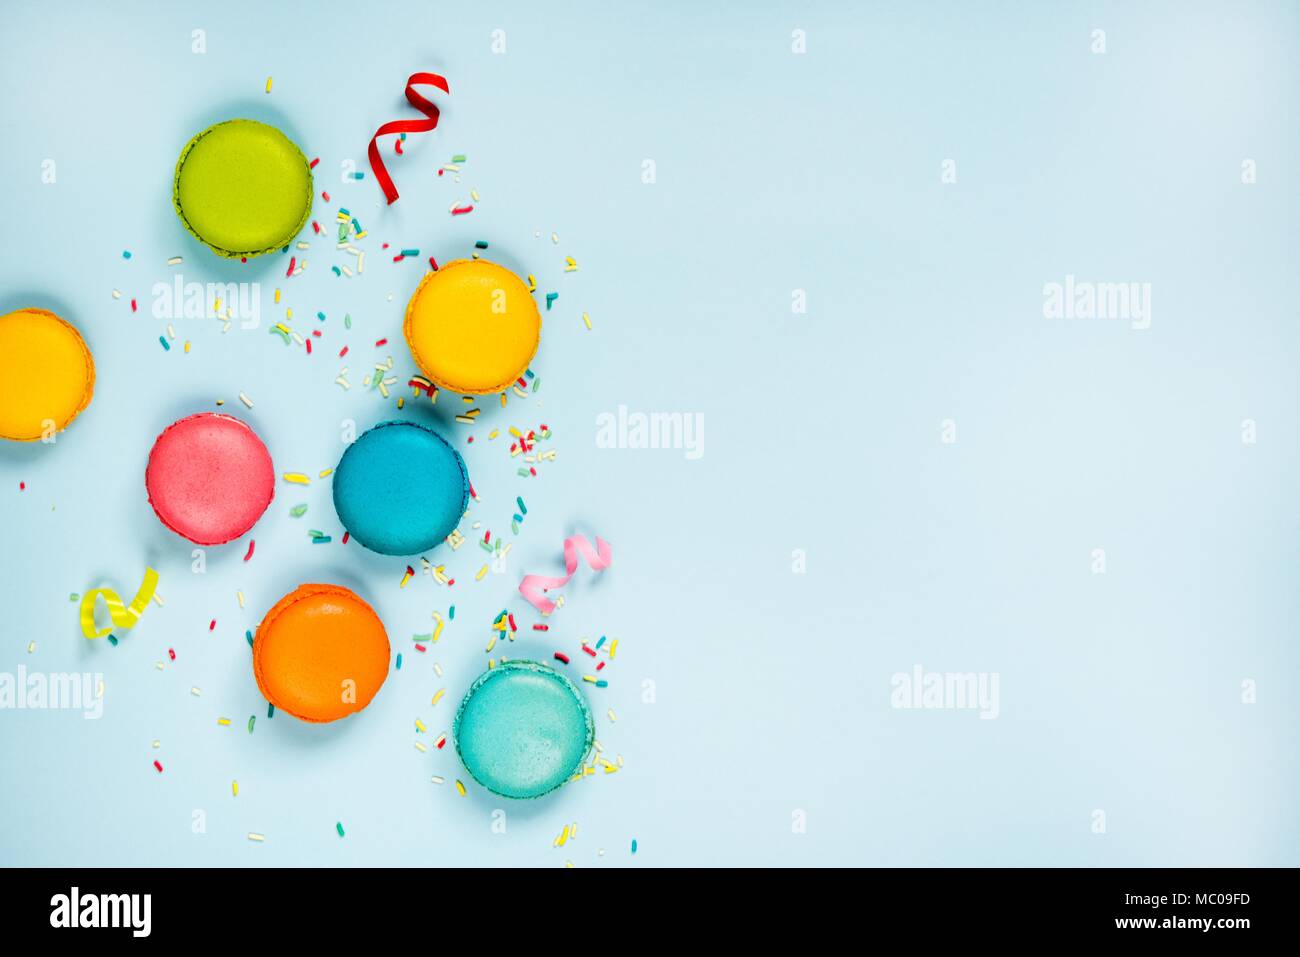 Top view of colorful macaroons, sugar sprinkles and party ribbons arranged over blue background. Copy space. Stock Photo